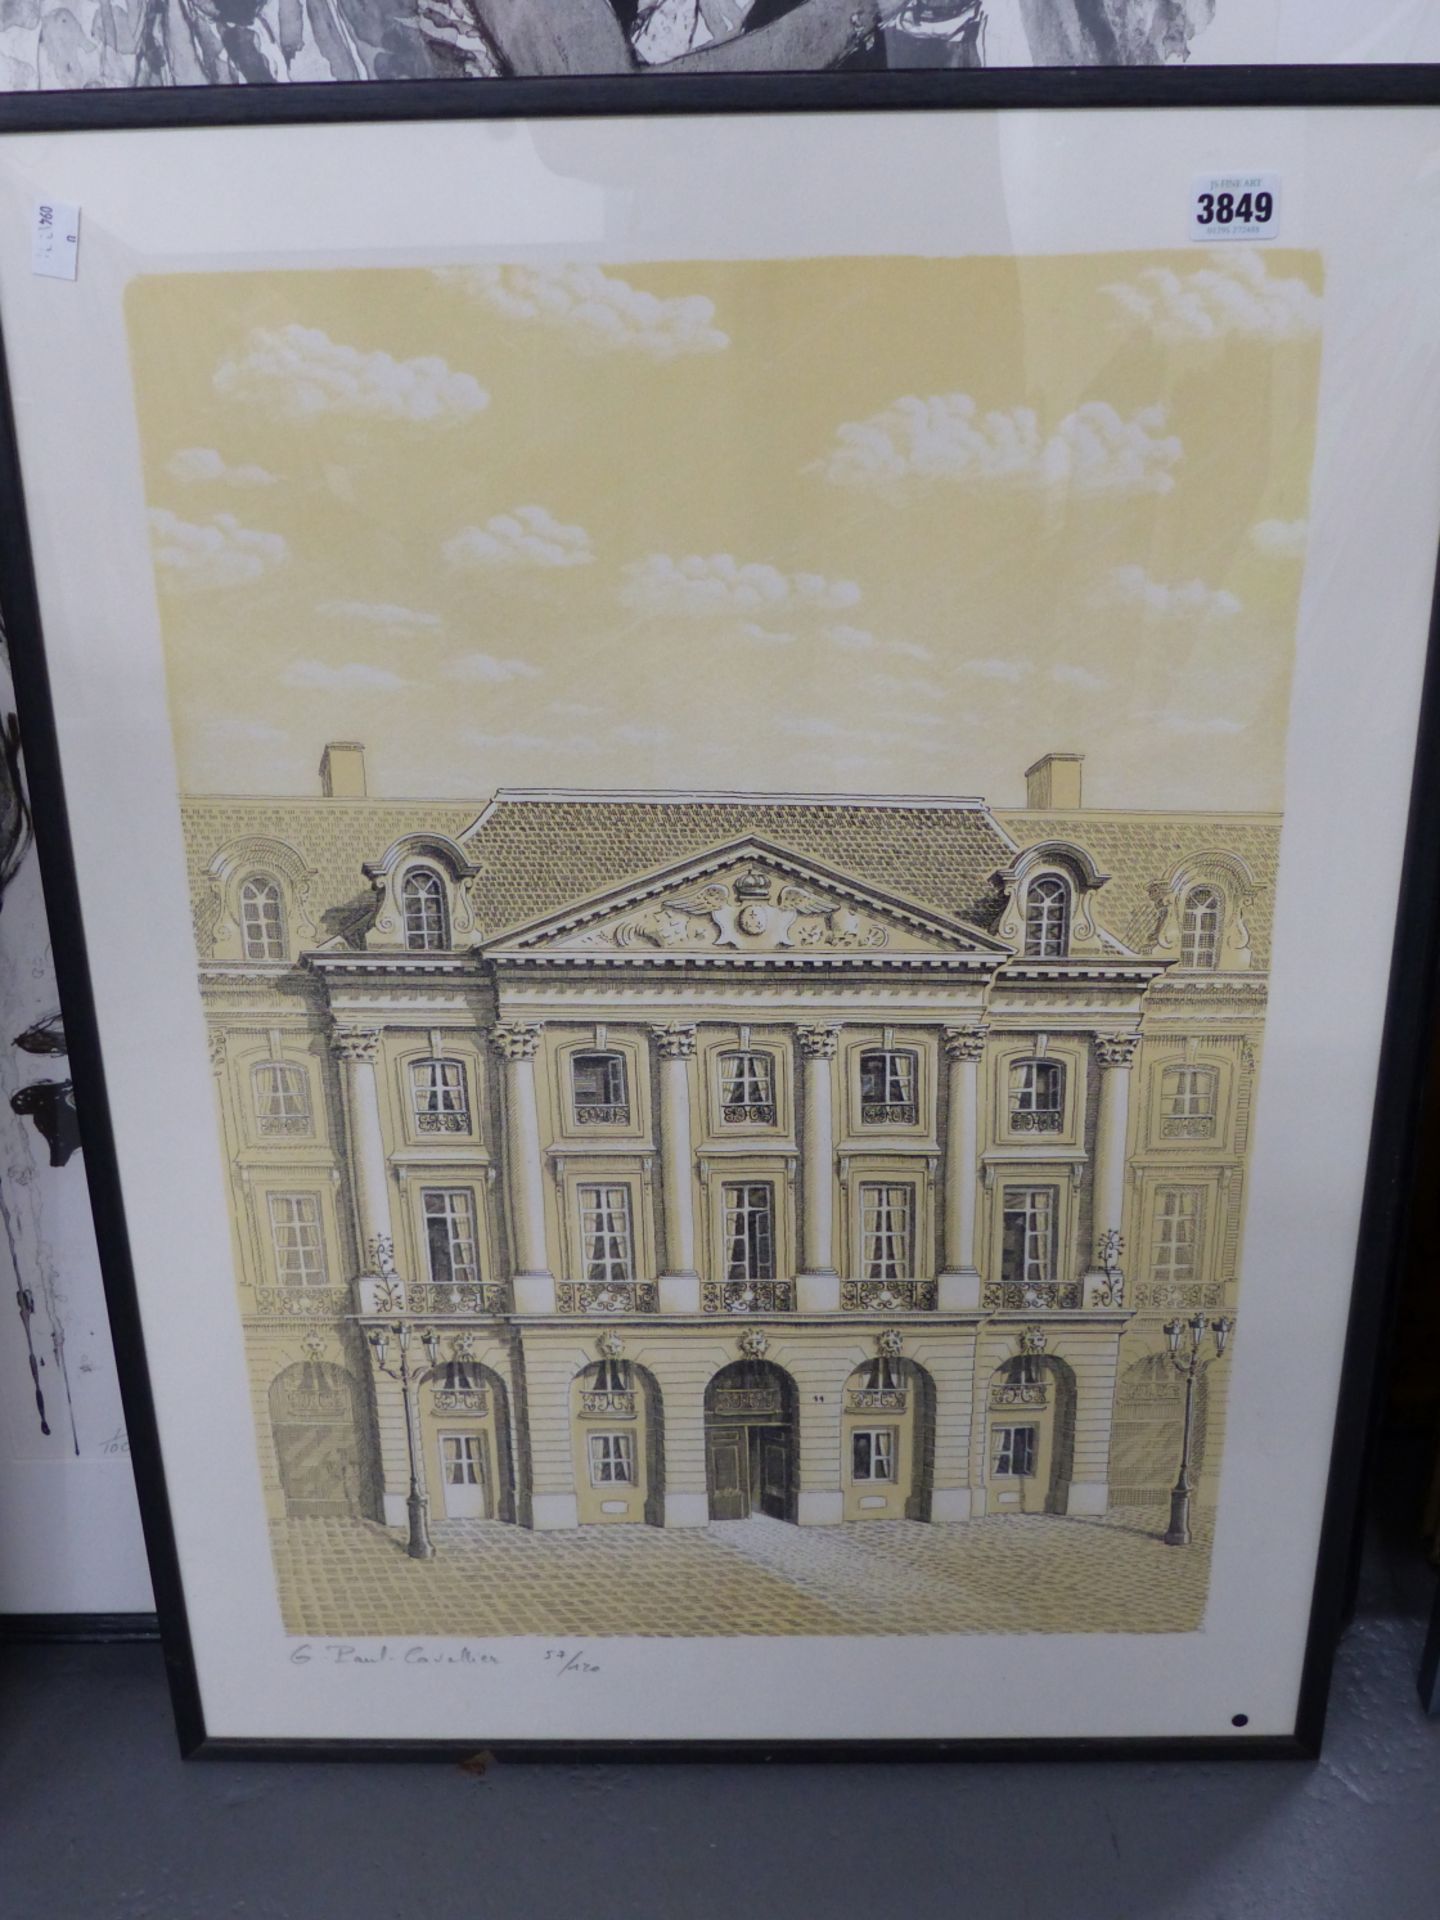 GERALD PAUL CAVALIER (20TH CENTURY). ARR. AN ITALIAN TOWN HALL FACADE, LITHOGRAPH, PENCIL SIGNED AND - Image 5 of 5